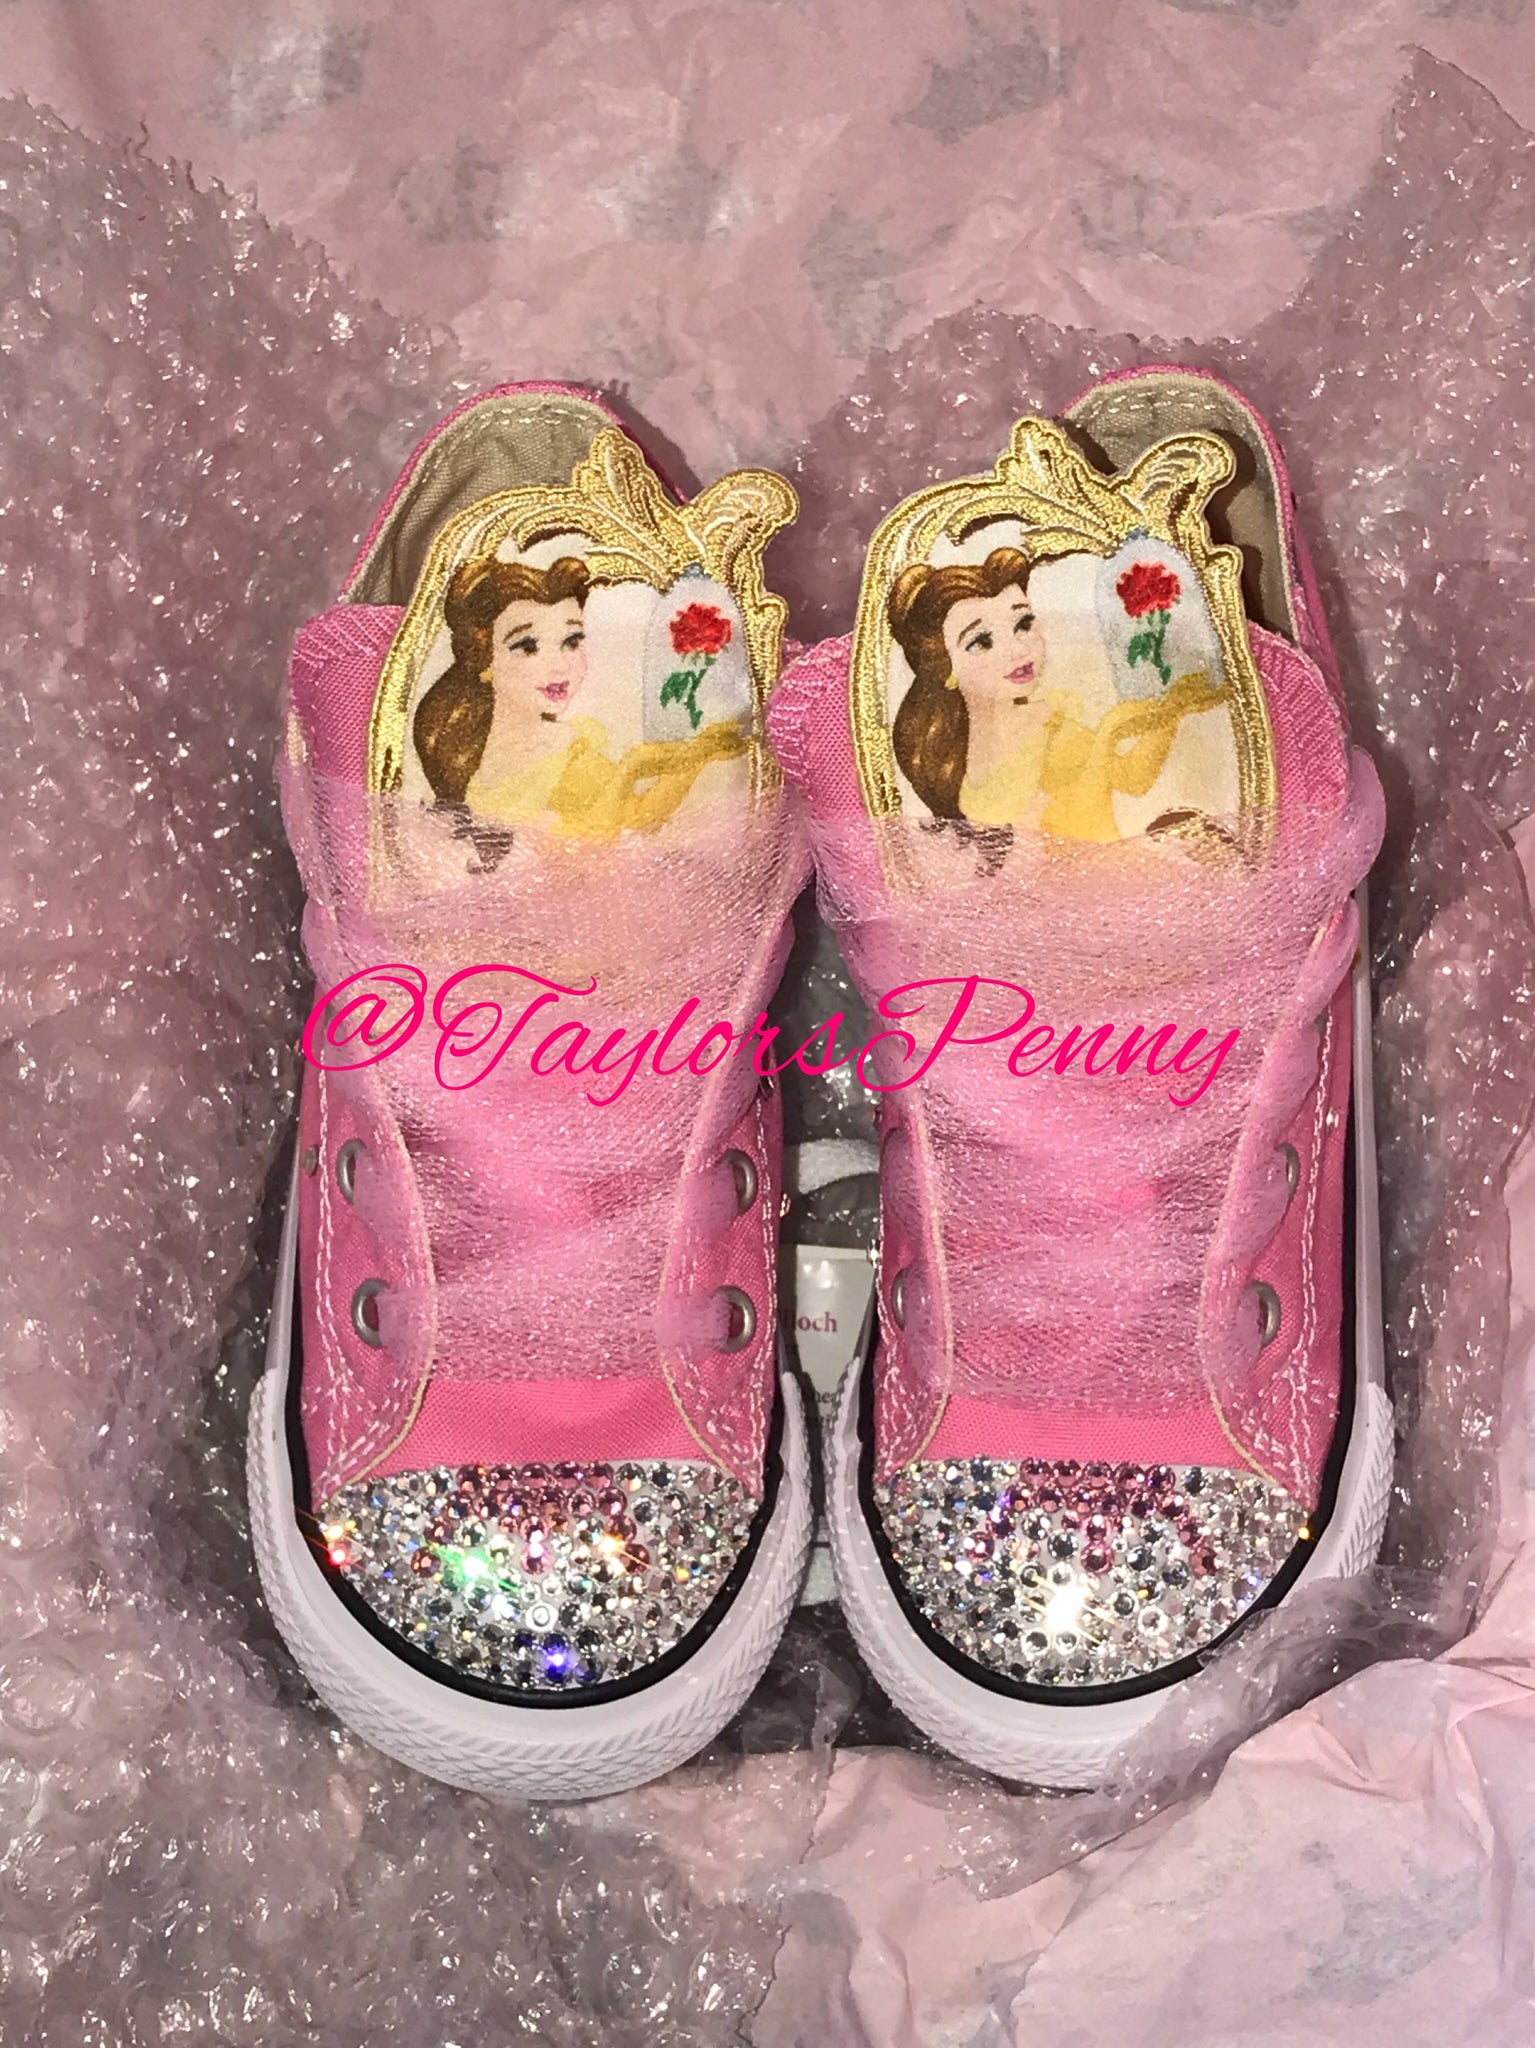 converse beauty and the beast